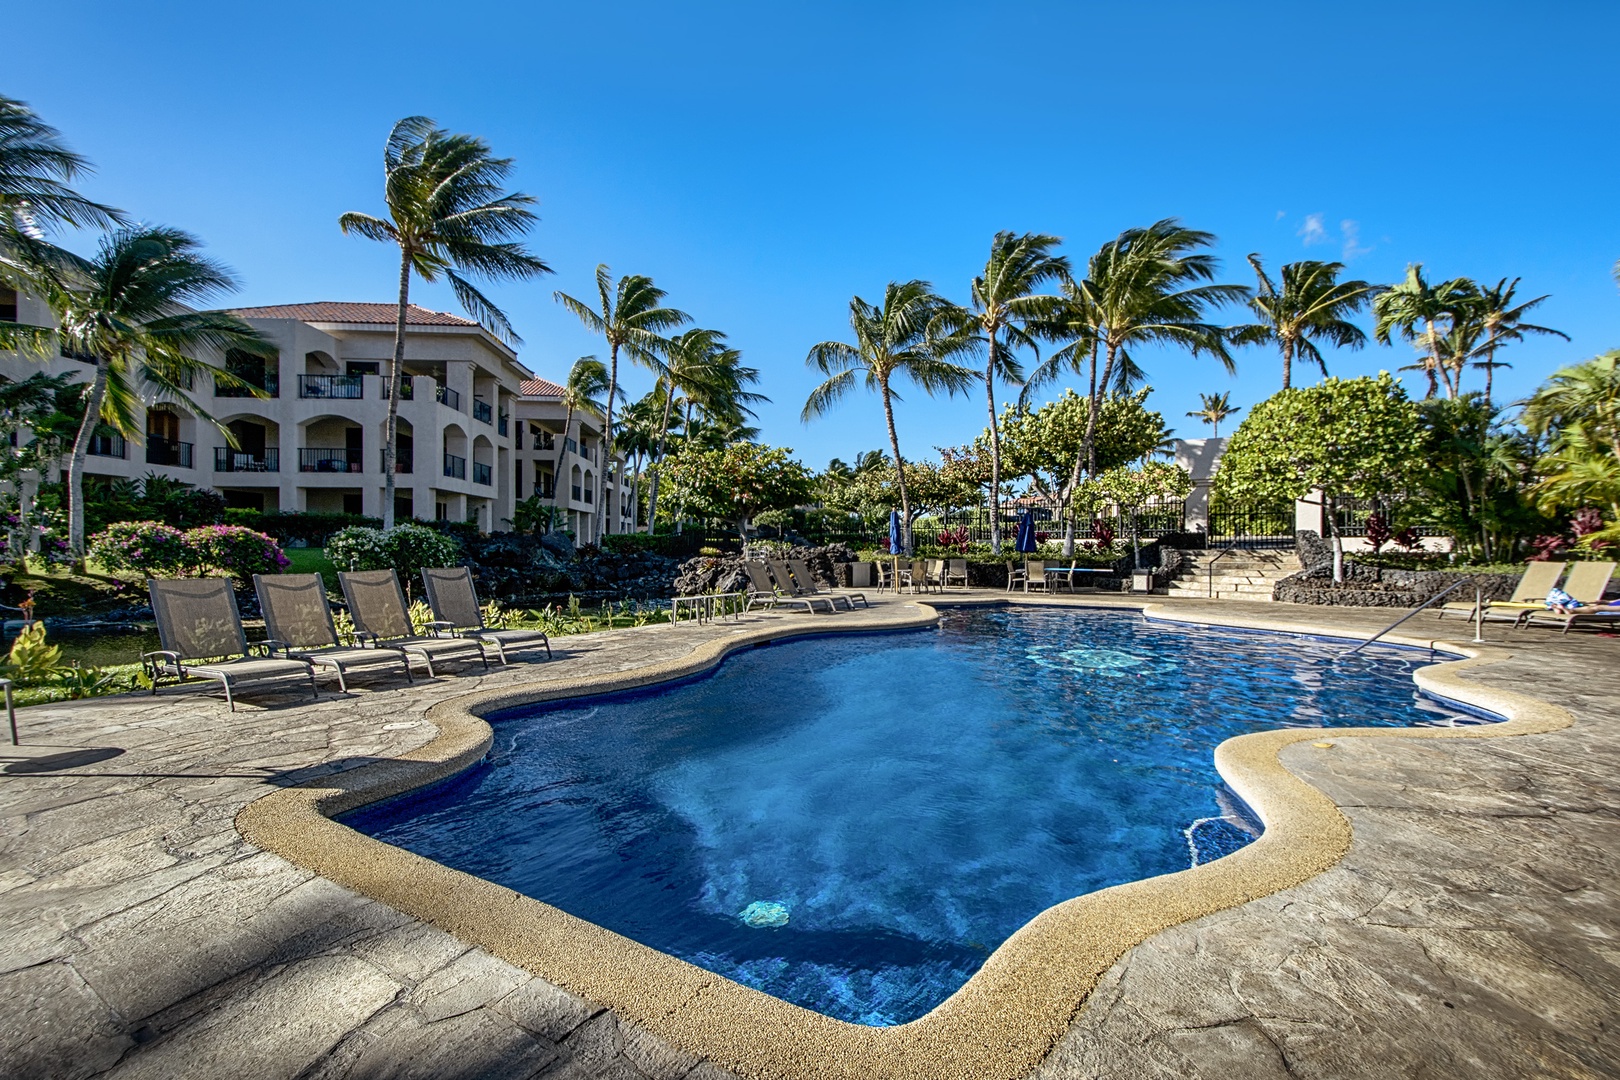 Waikoloa Vacation Rentals, Shores at Waikoloa Beach Resort 332 - Complex pool for your enjoyment!